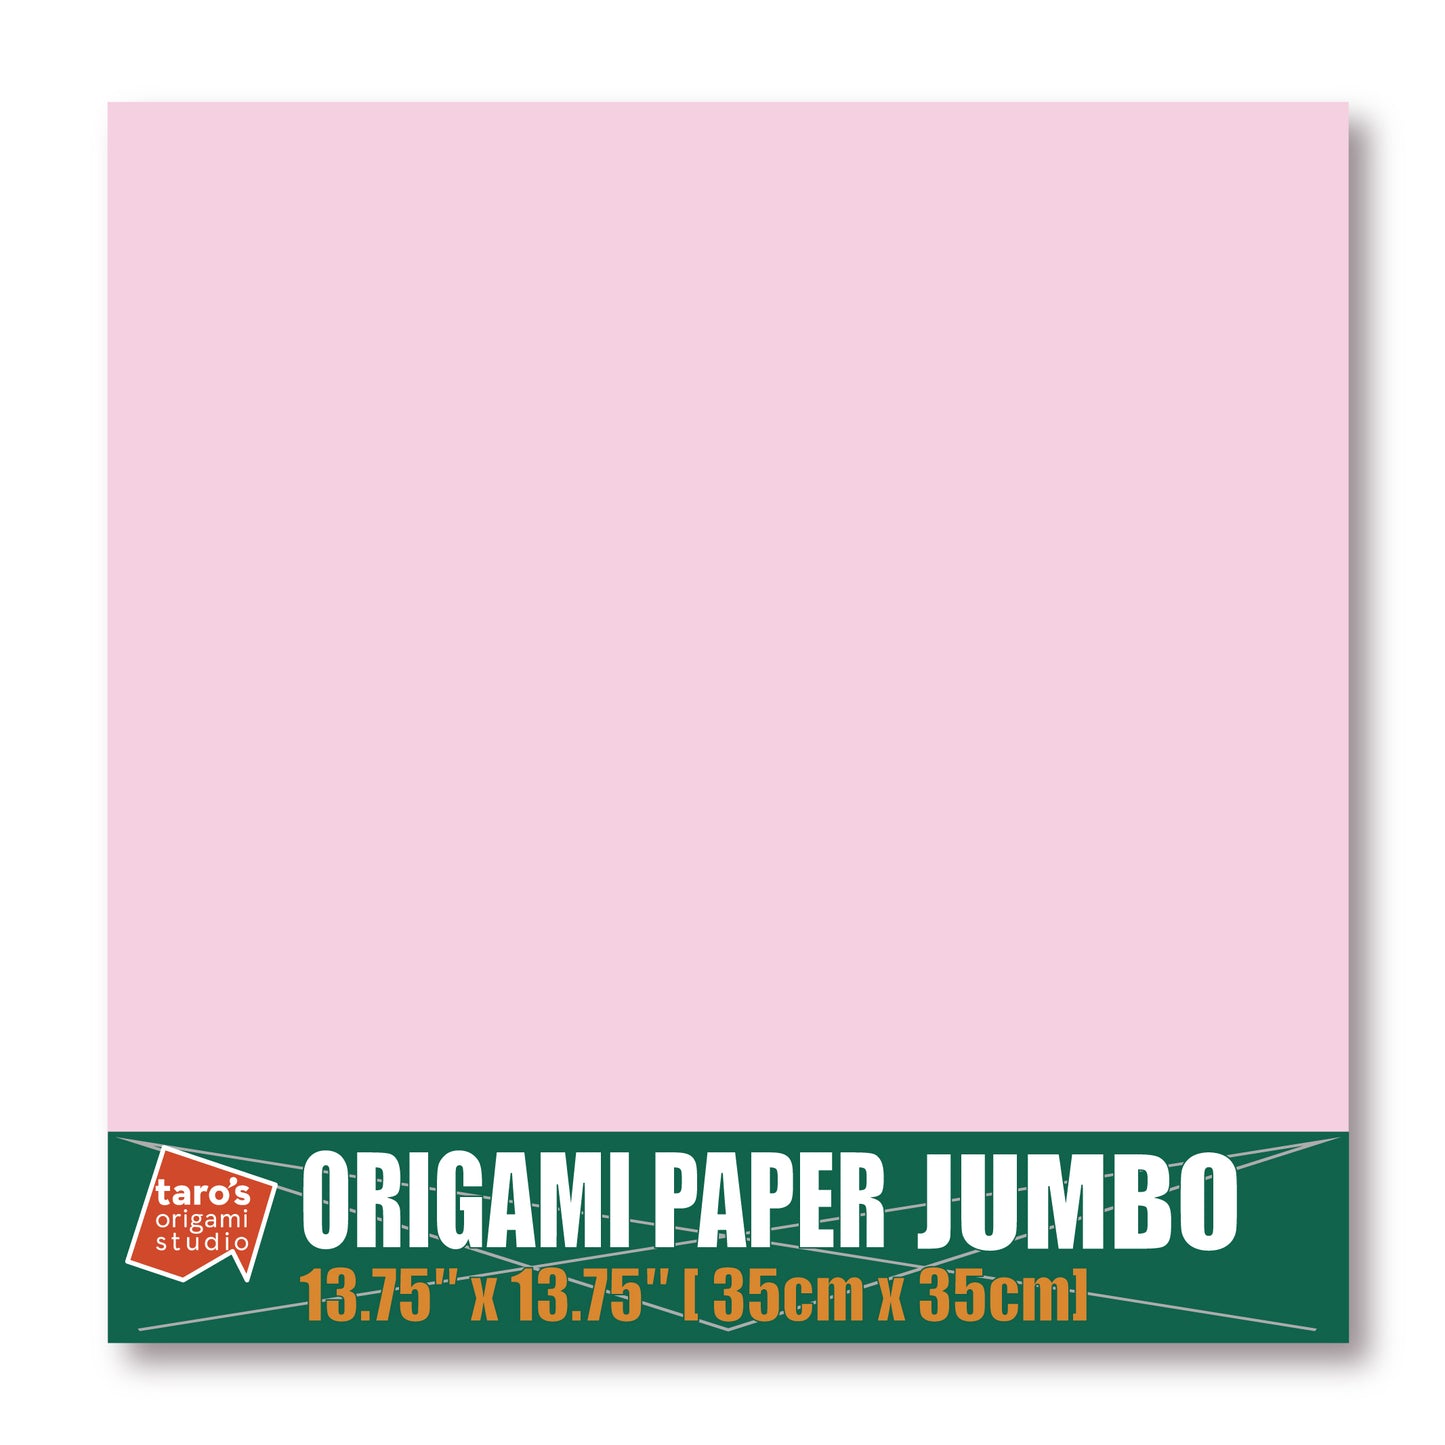 [Taro's Origami Studio] Jumbo 13.75 Inch / 35cm One Sided Single Color (Light Pink) 25 Sheets (All Same Color) Square Easy Fold Premium Japanese Paper (Made in Japan)